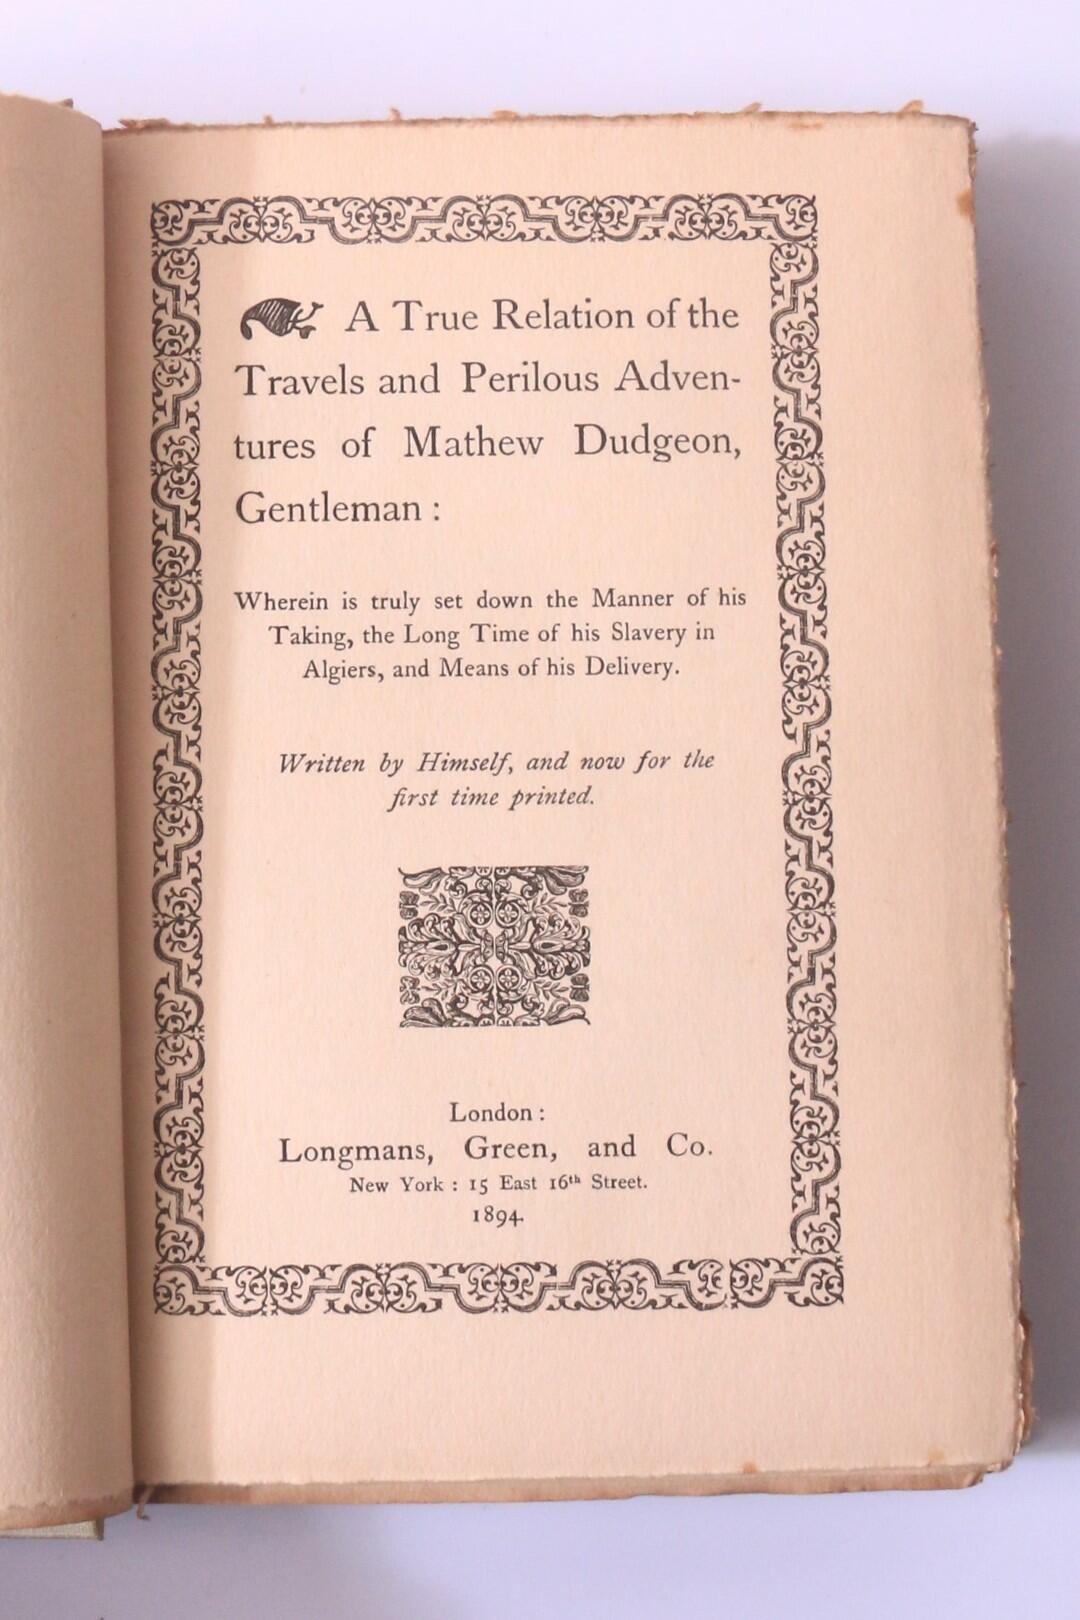 Mathew Dudgeon [Alfred Henry Huth] - A True Relation of the Travels and Perilous Adventures of Mathew Dudgeon, Gentleman: Wherein is Truly Set Down the Manner of His Taking, the Long Time of His Slavery in Algiers, and the Means of His Delivery - Longmans, Green & Co., 1894, First Edition.